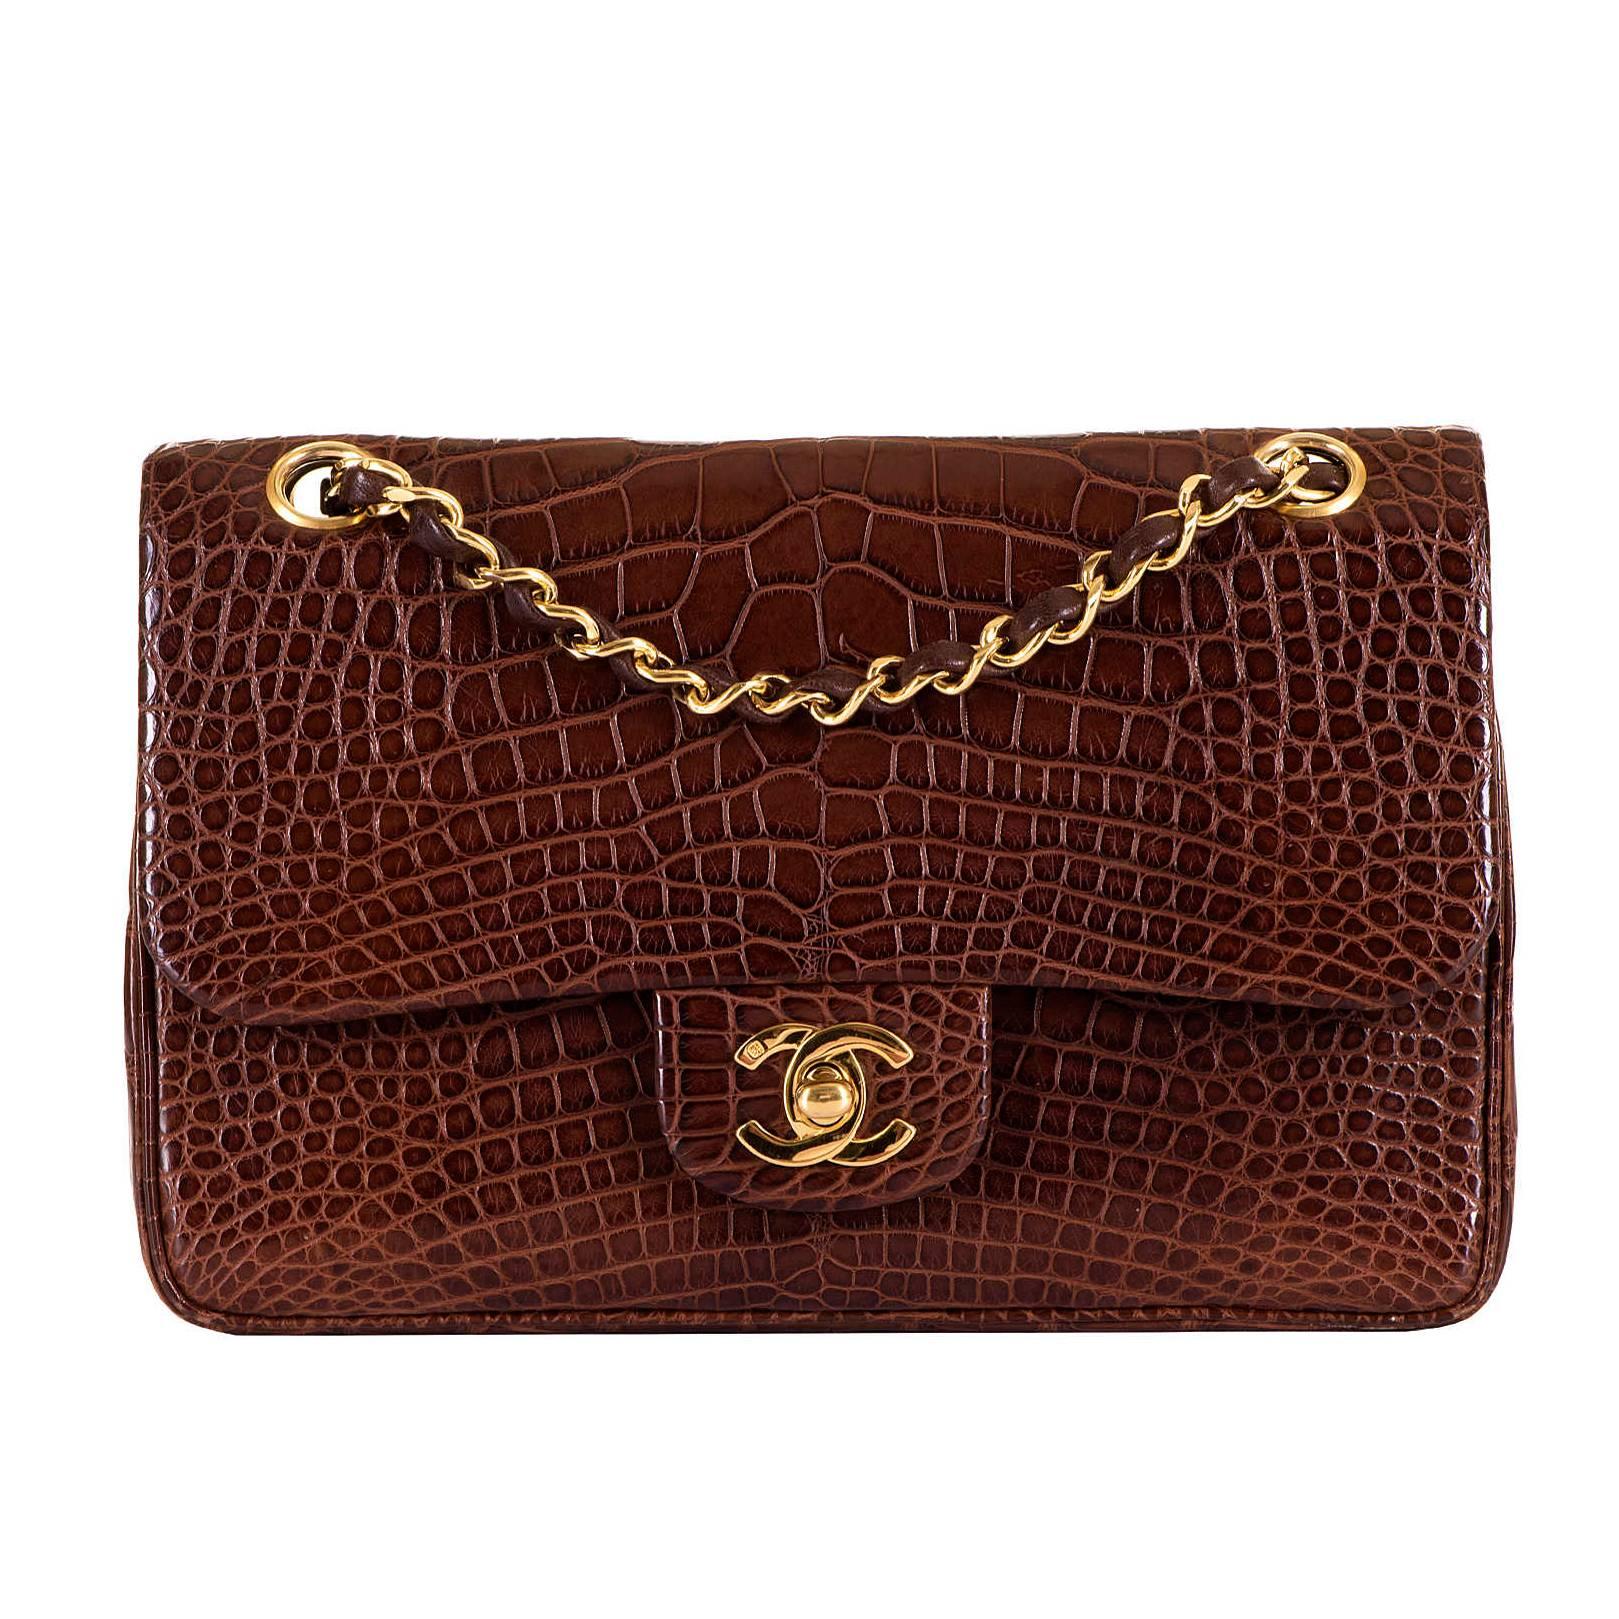 WOW! Chanel 23cm Double Flap 'Sac Timeless' in Cognac Crocodile & Gold Hardware